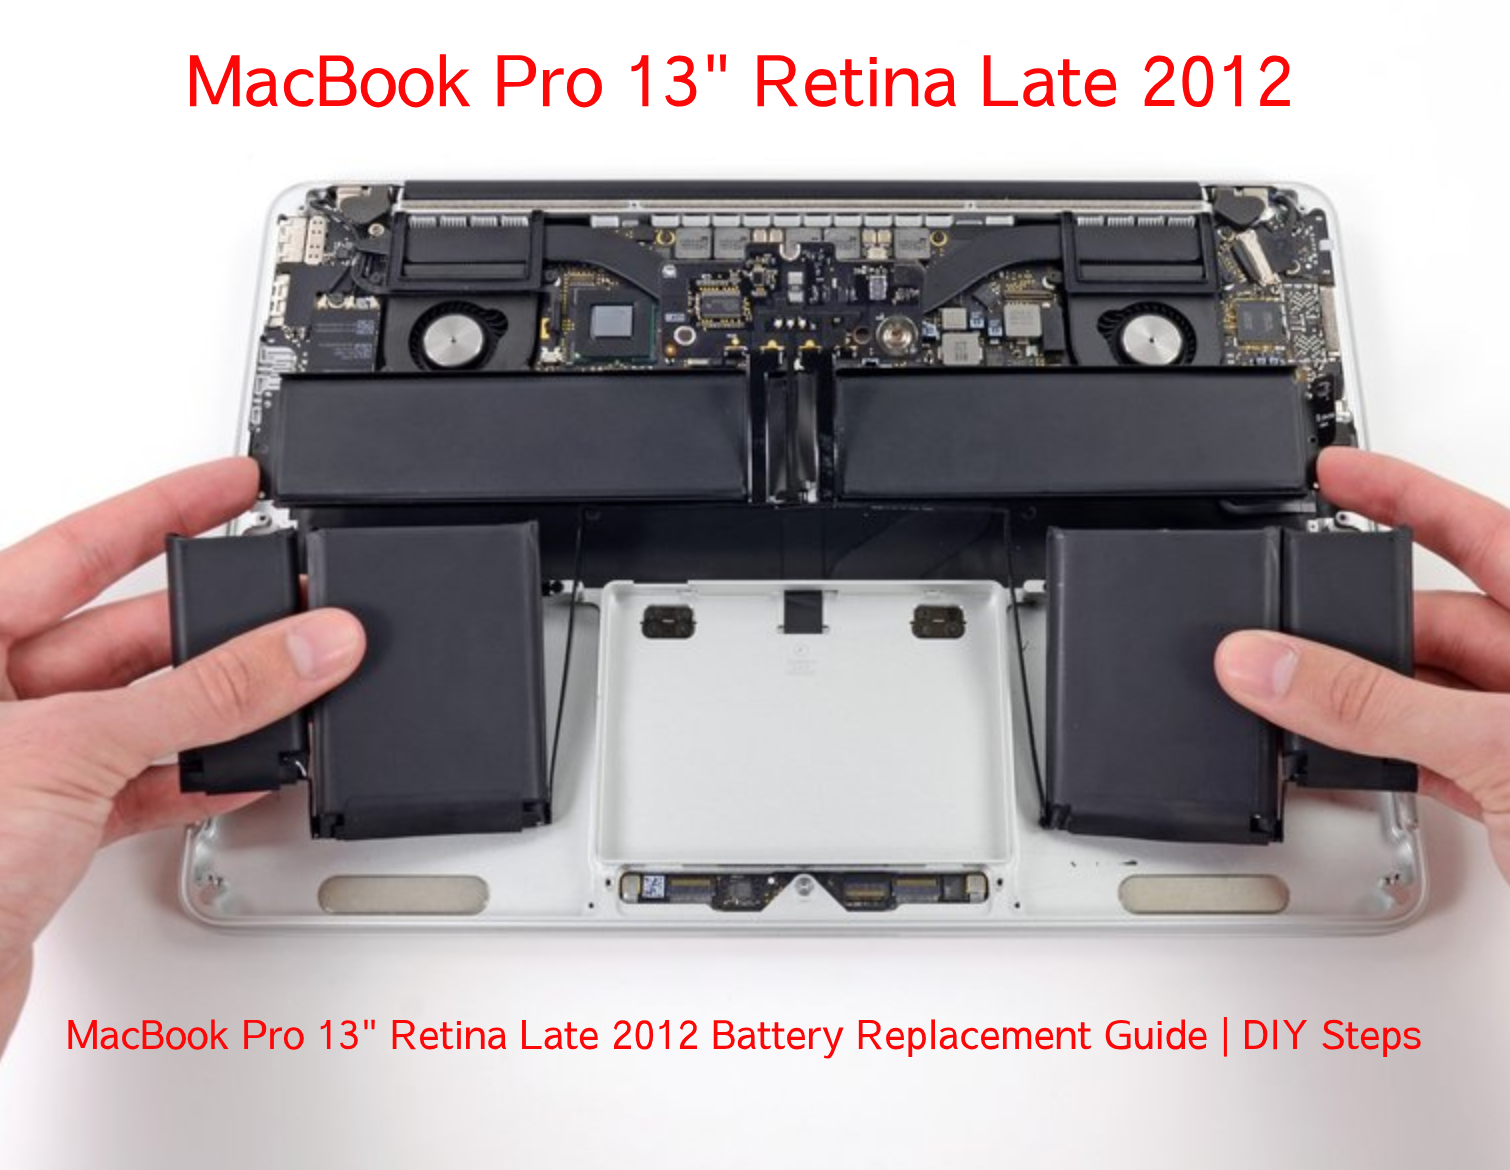 MacBook Pro 13" Retina Display Late 2012 with battery replacement tools and new battery.